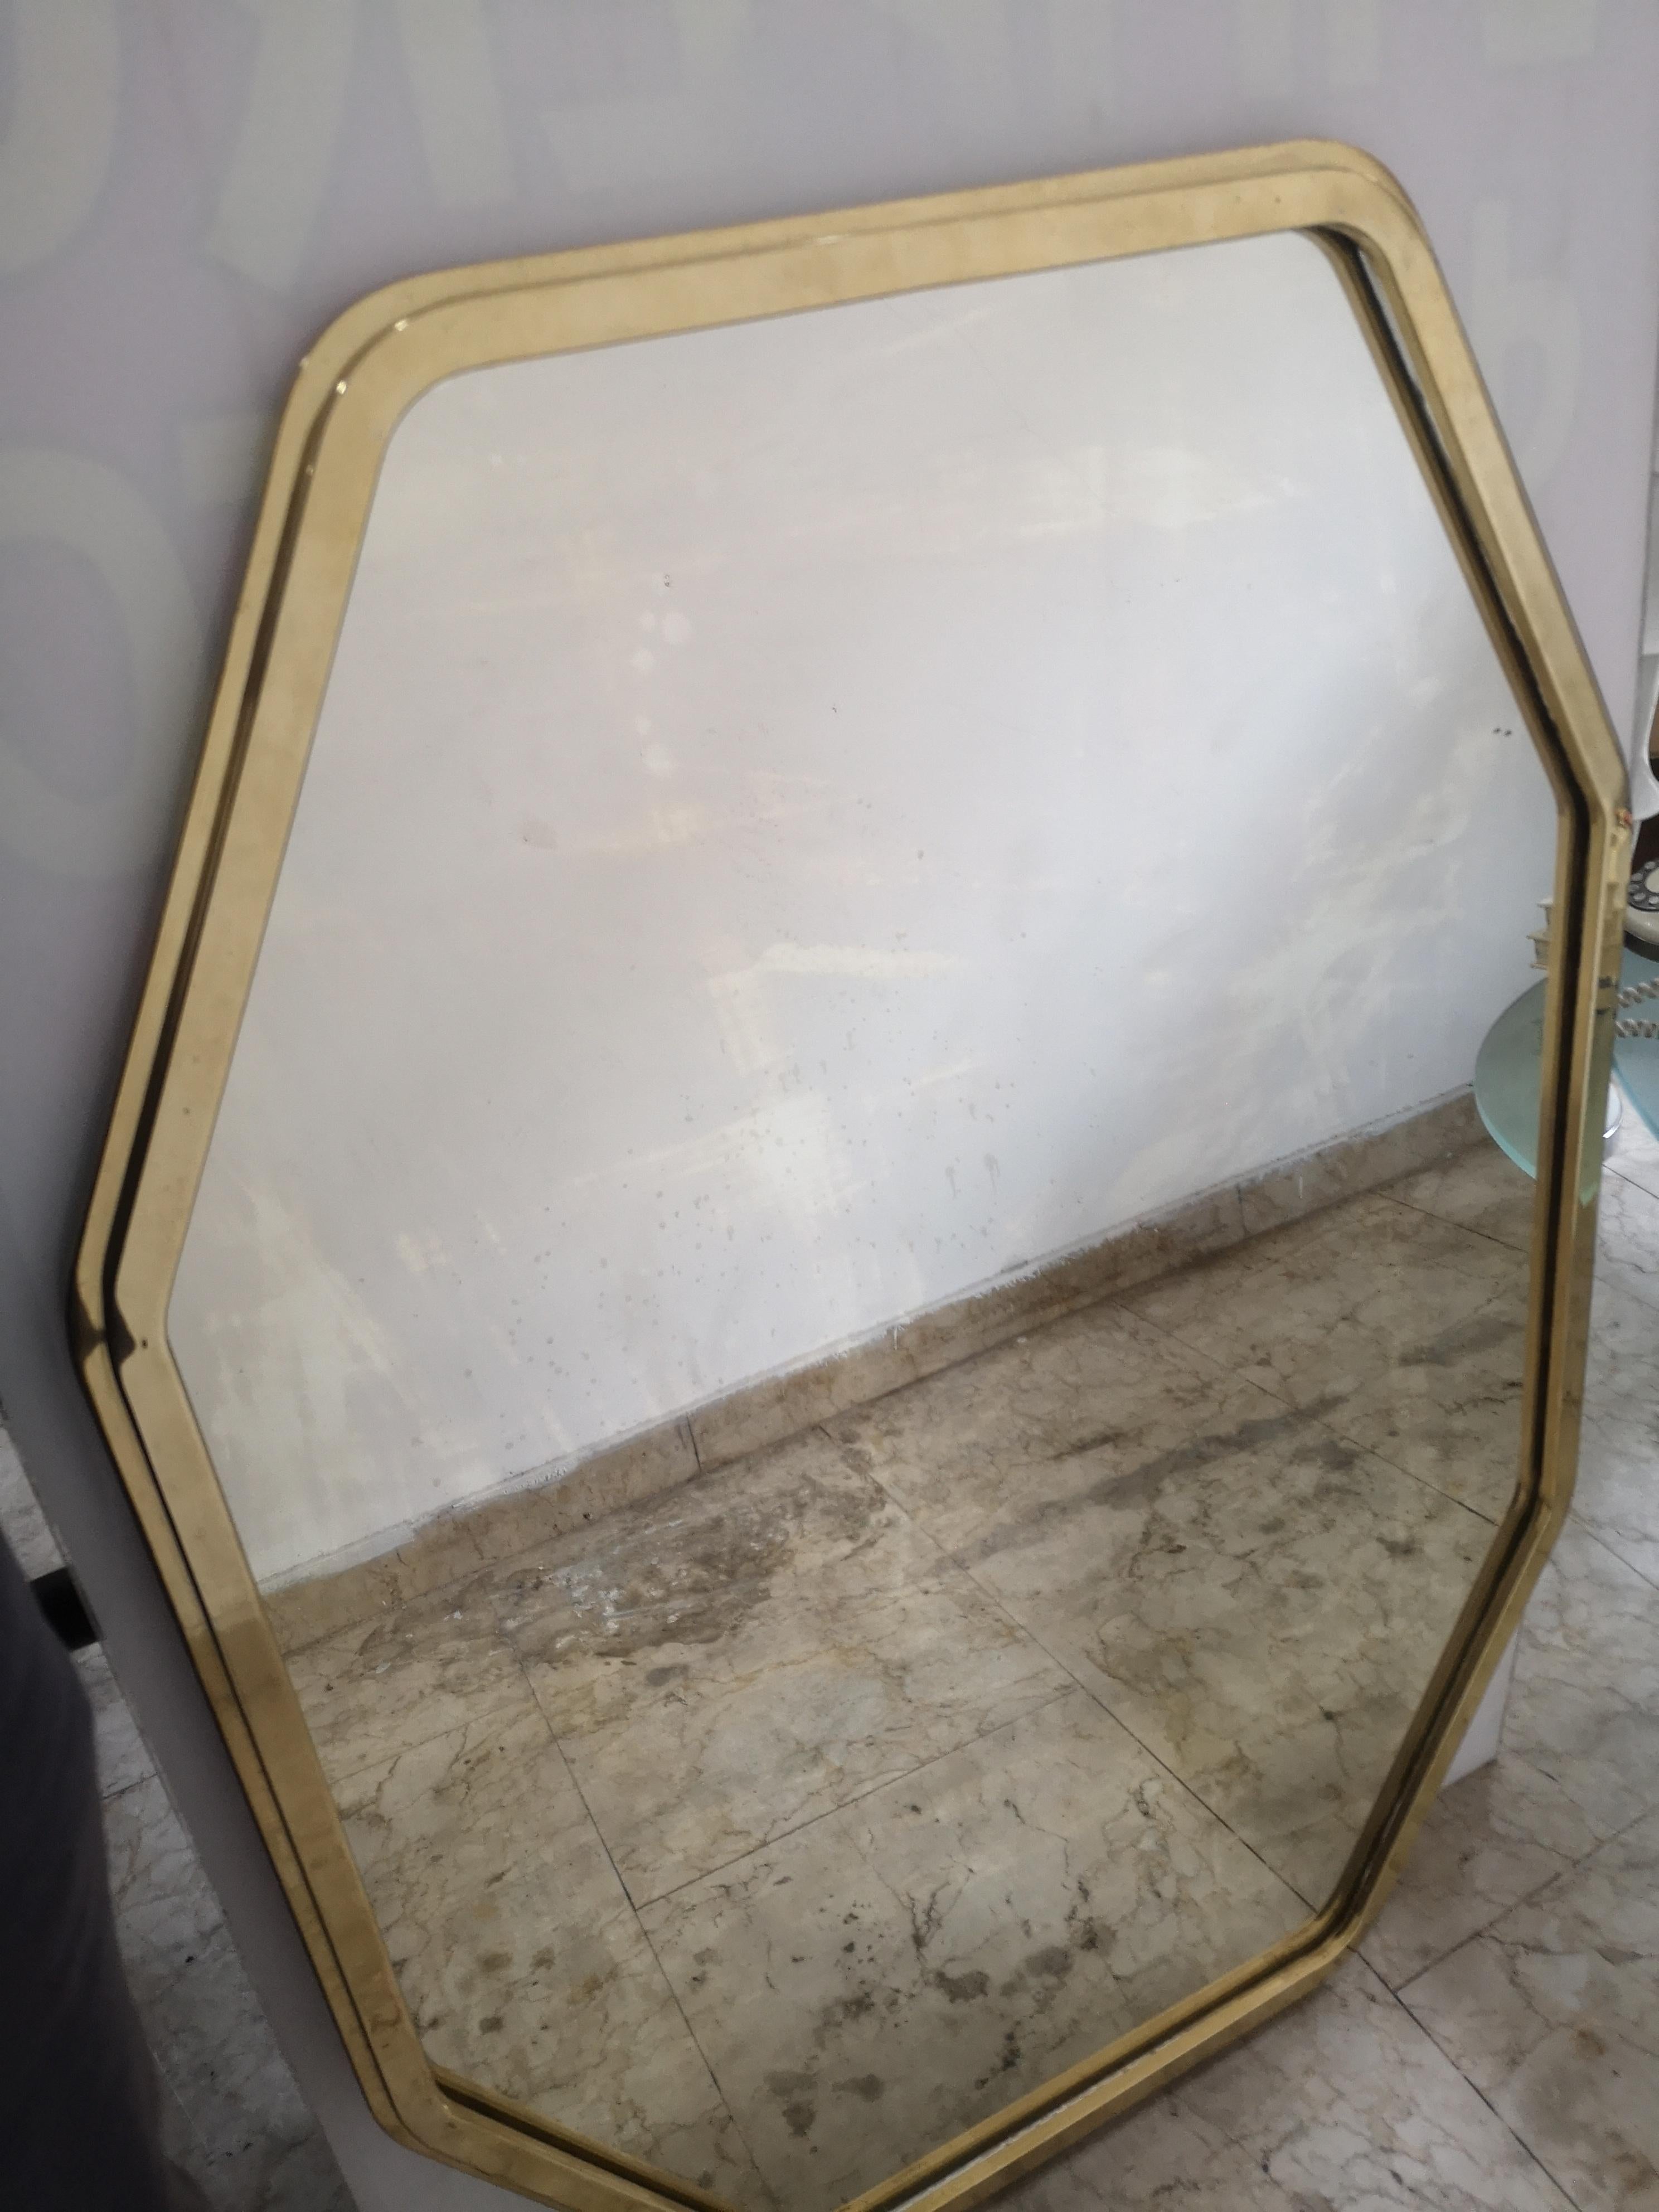 Large brass wall mirror from the 80s
in good condition
The mirror measures:
height 104 cm
width 75 cm
Available for further information

accurate shipping

=========

Large brass wall mirror 1980s
in good condition 

The mirror measures:
in height  